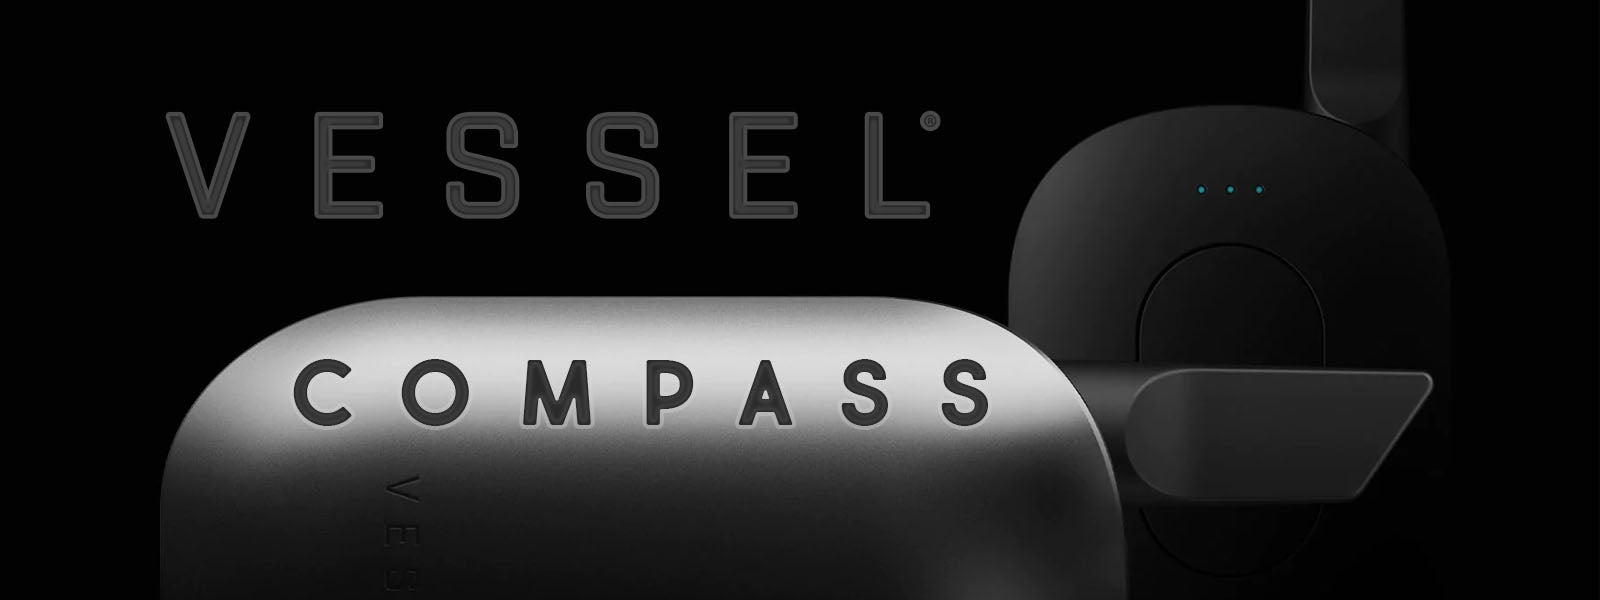 Vessel Compass - Available at Marketplace V